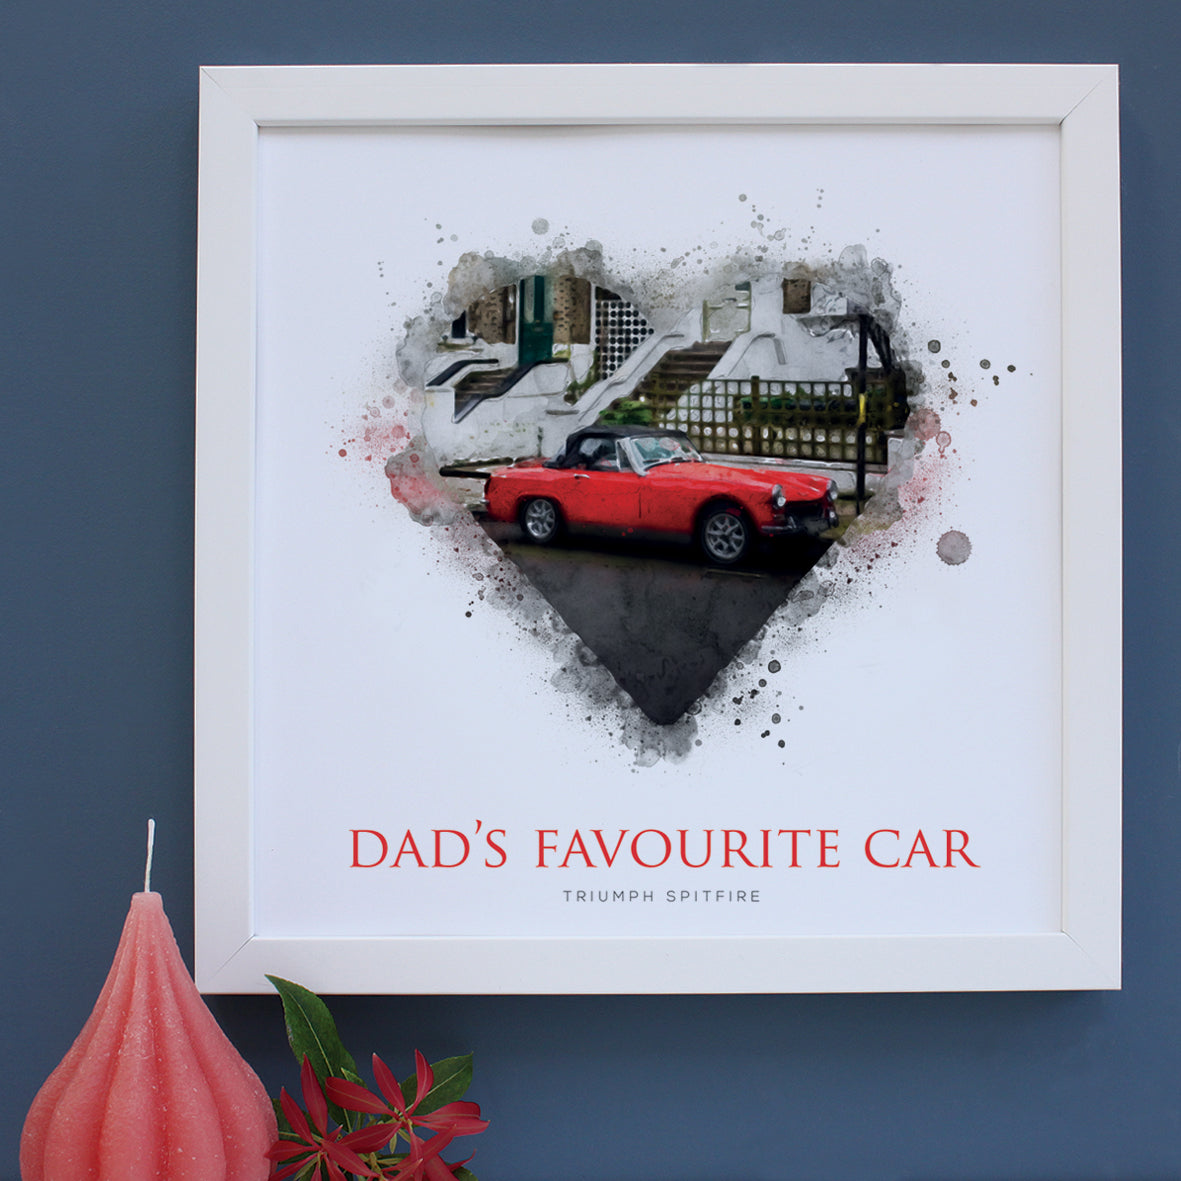 Triumph Spitfire illustration for Daddy in a white square frame